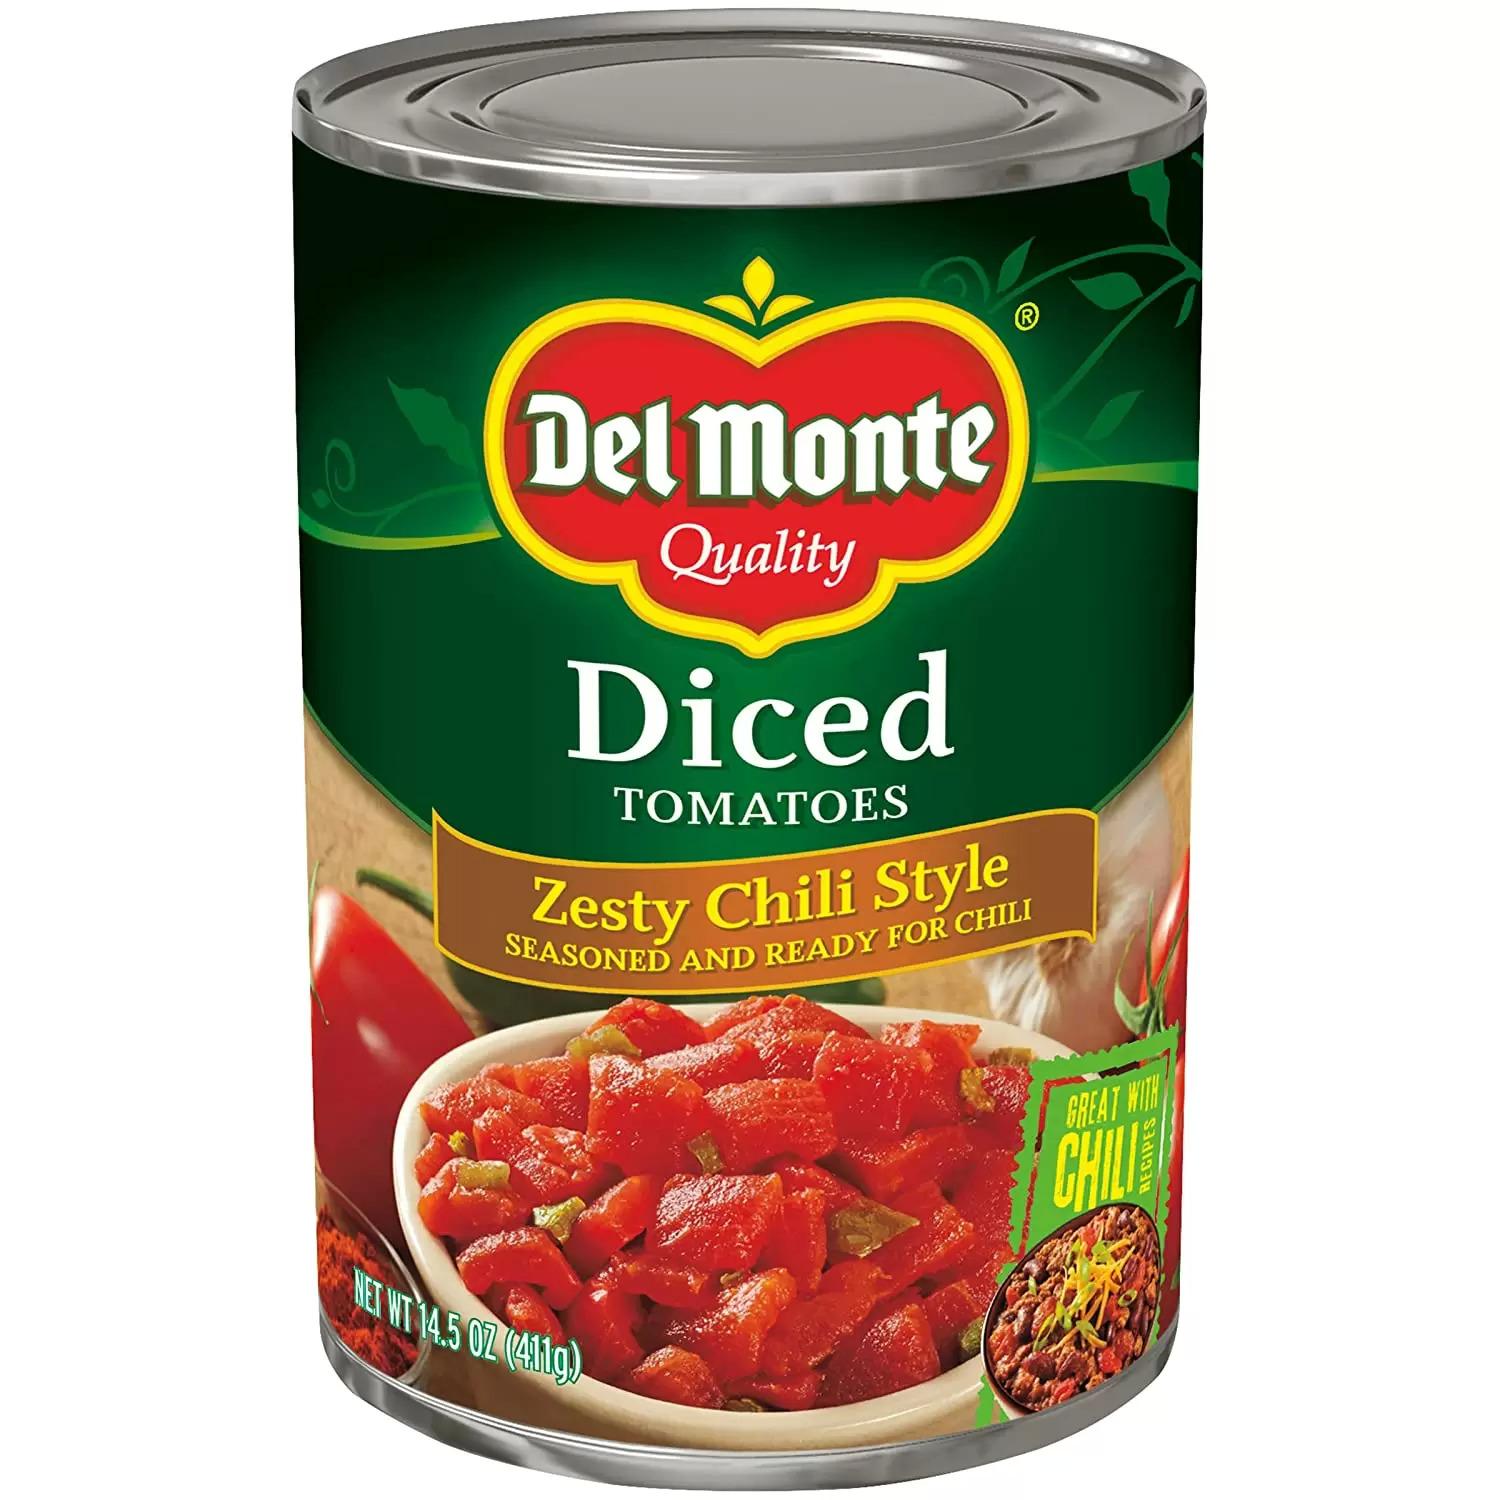 Del Monte Canned Diced Tomatoes for $0.87 Shipped